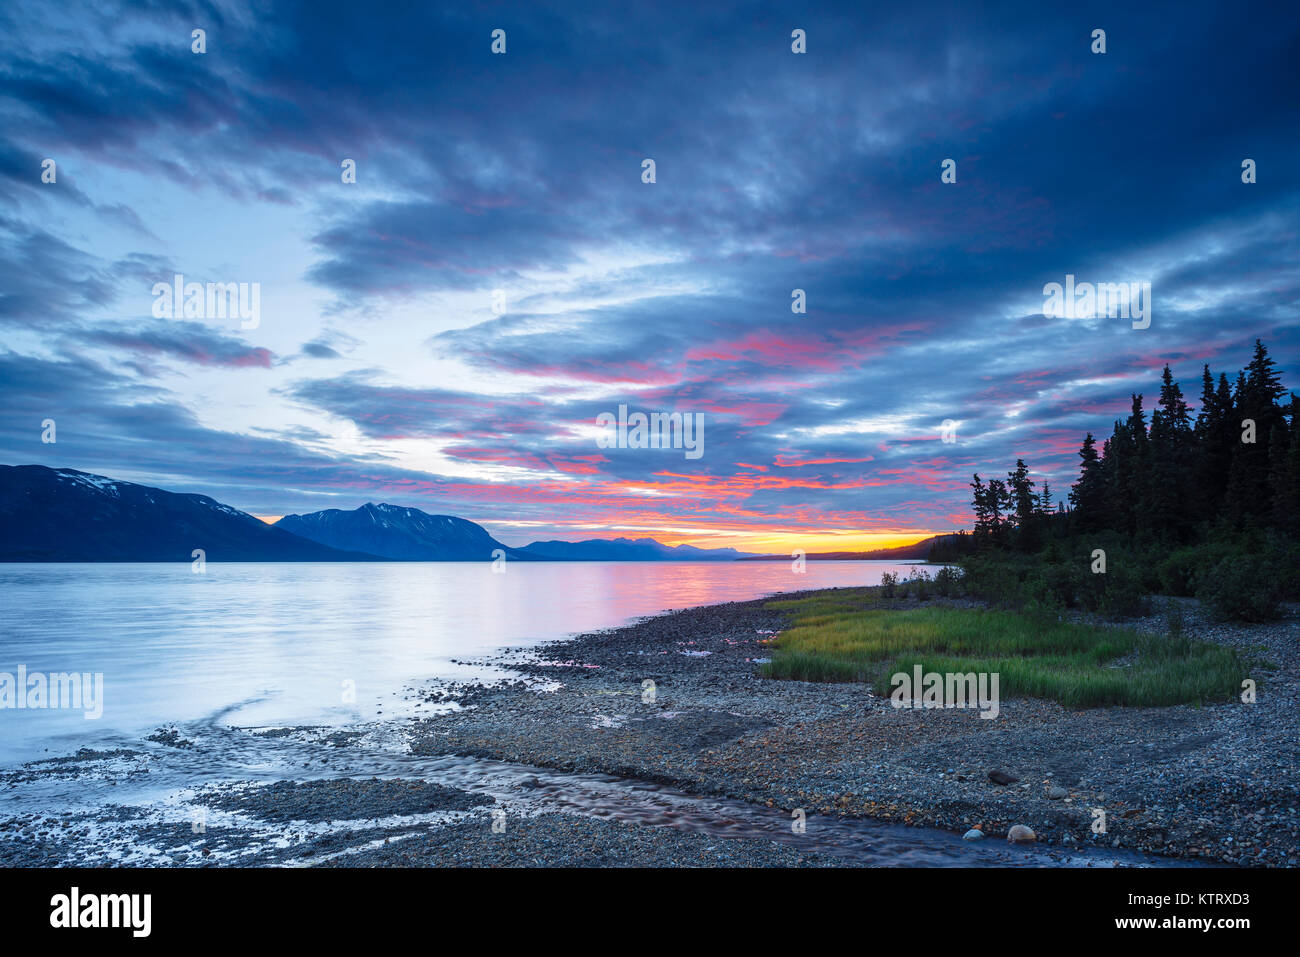 A sunset view of Atlin Lake from Warm Bay Recreation Site, near Atlin, British Columbia, Canada Stock Photo